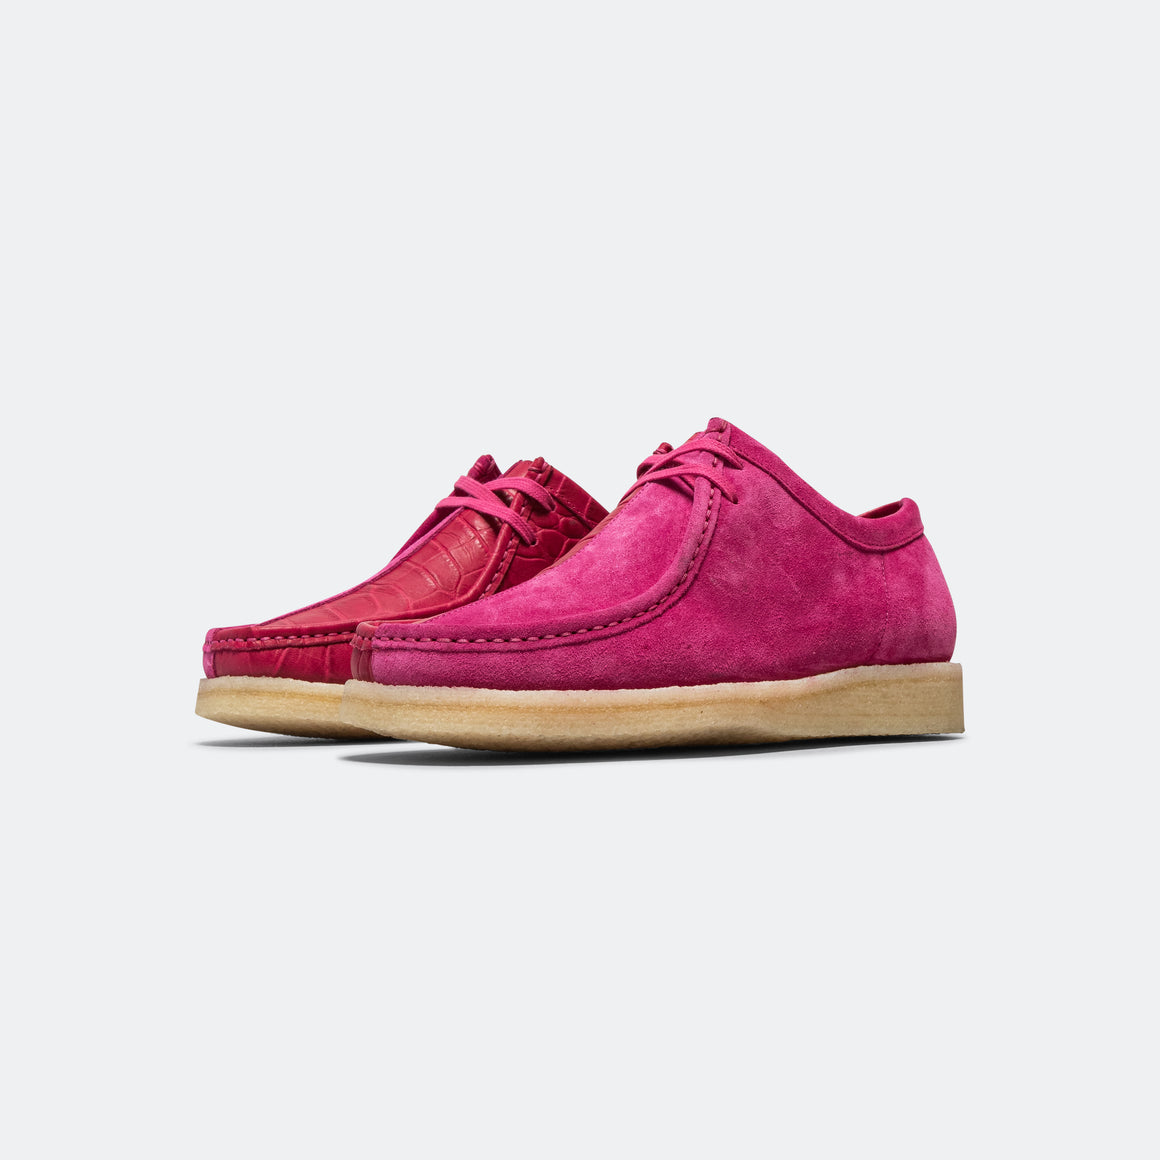 Padmore & Barnes - P204 × UP THERE - Pink Suede/Pink Croc - UP THERE